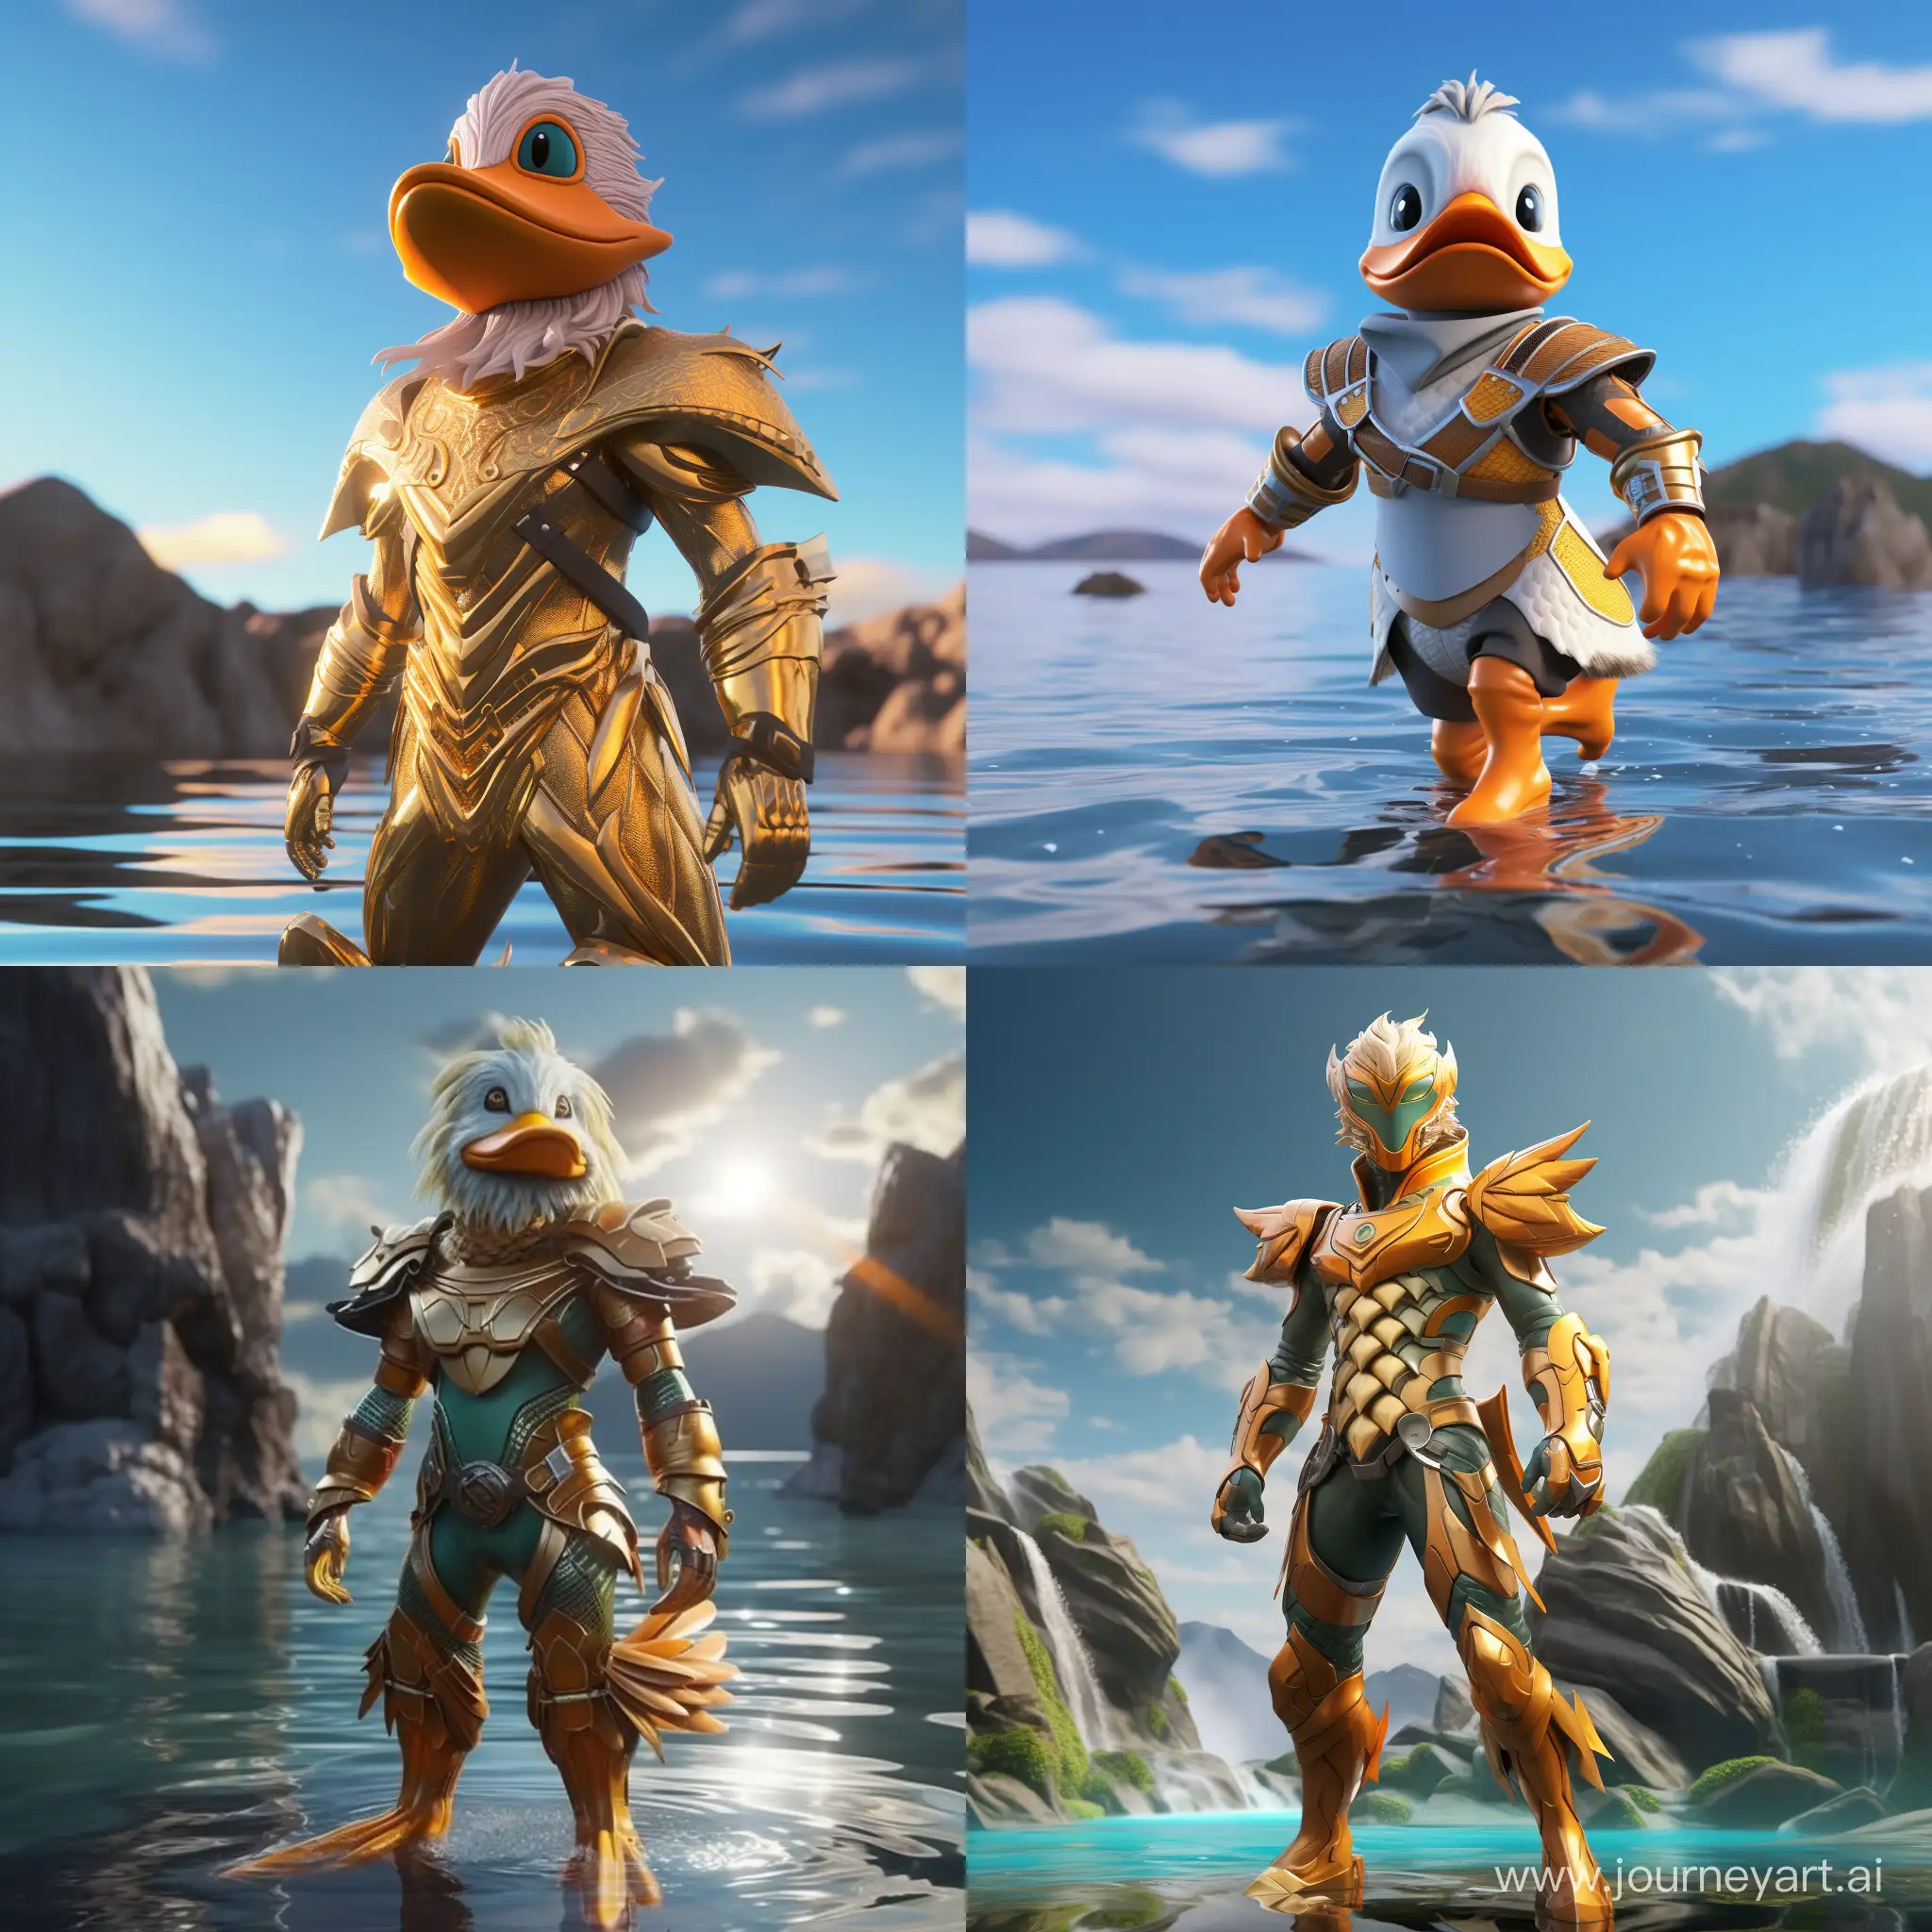 AquamanInspired-3D-Anime-Duck-Emerges-from-Water